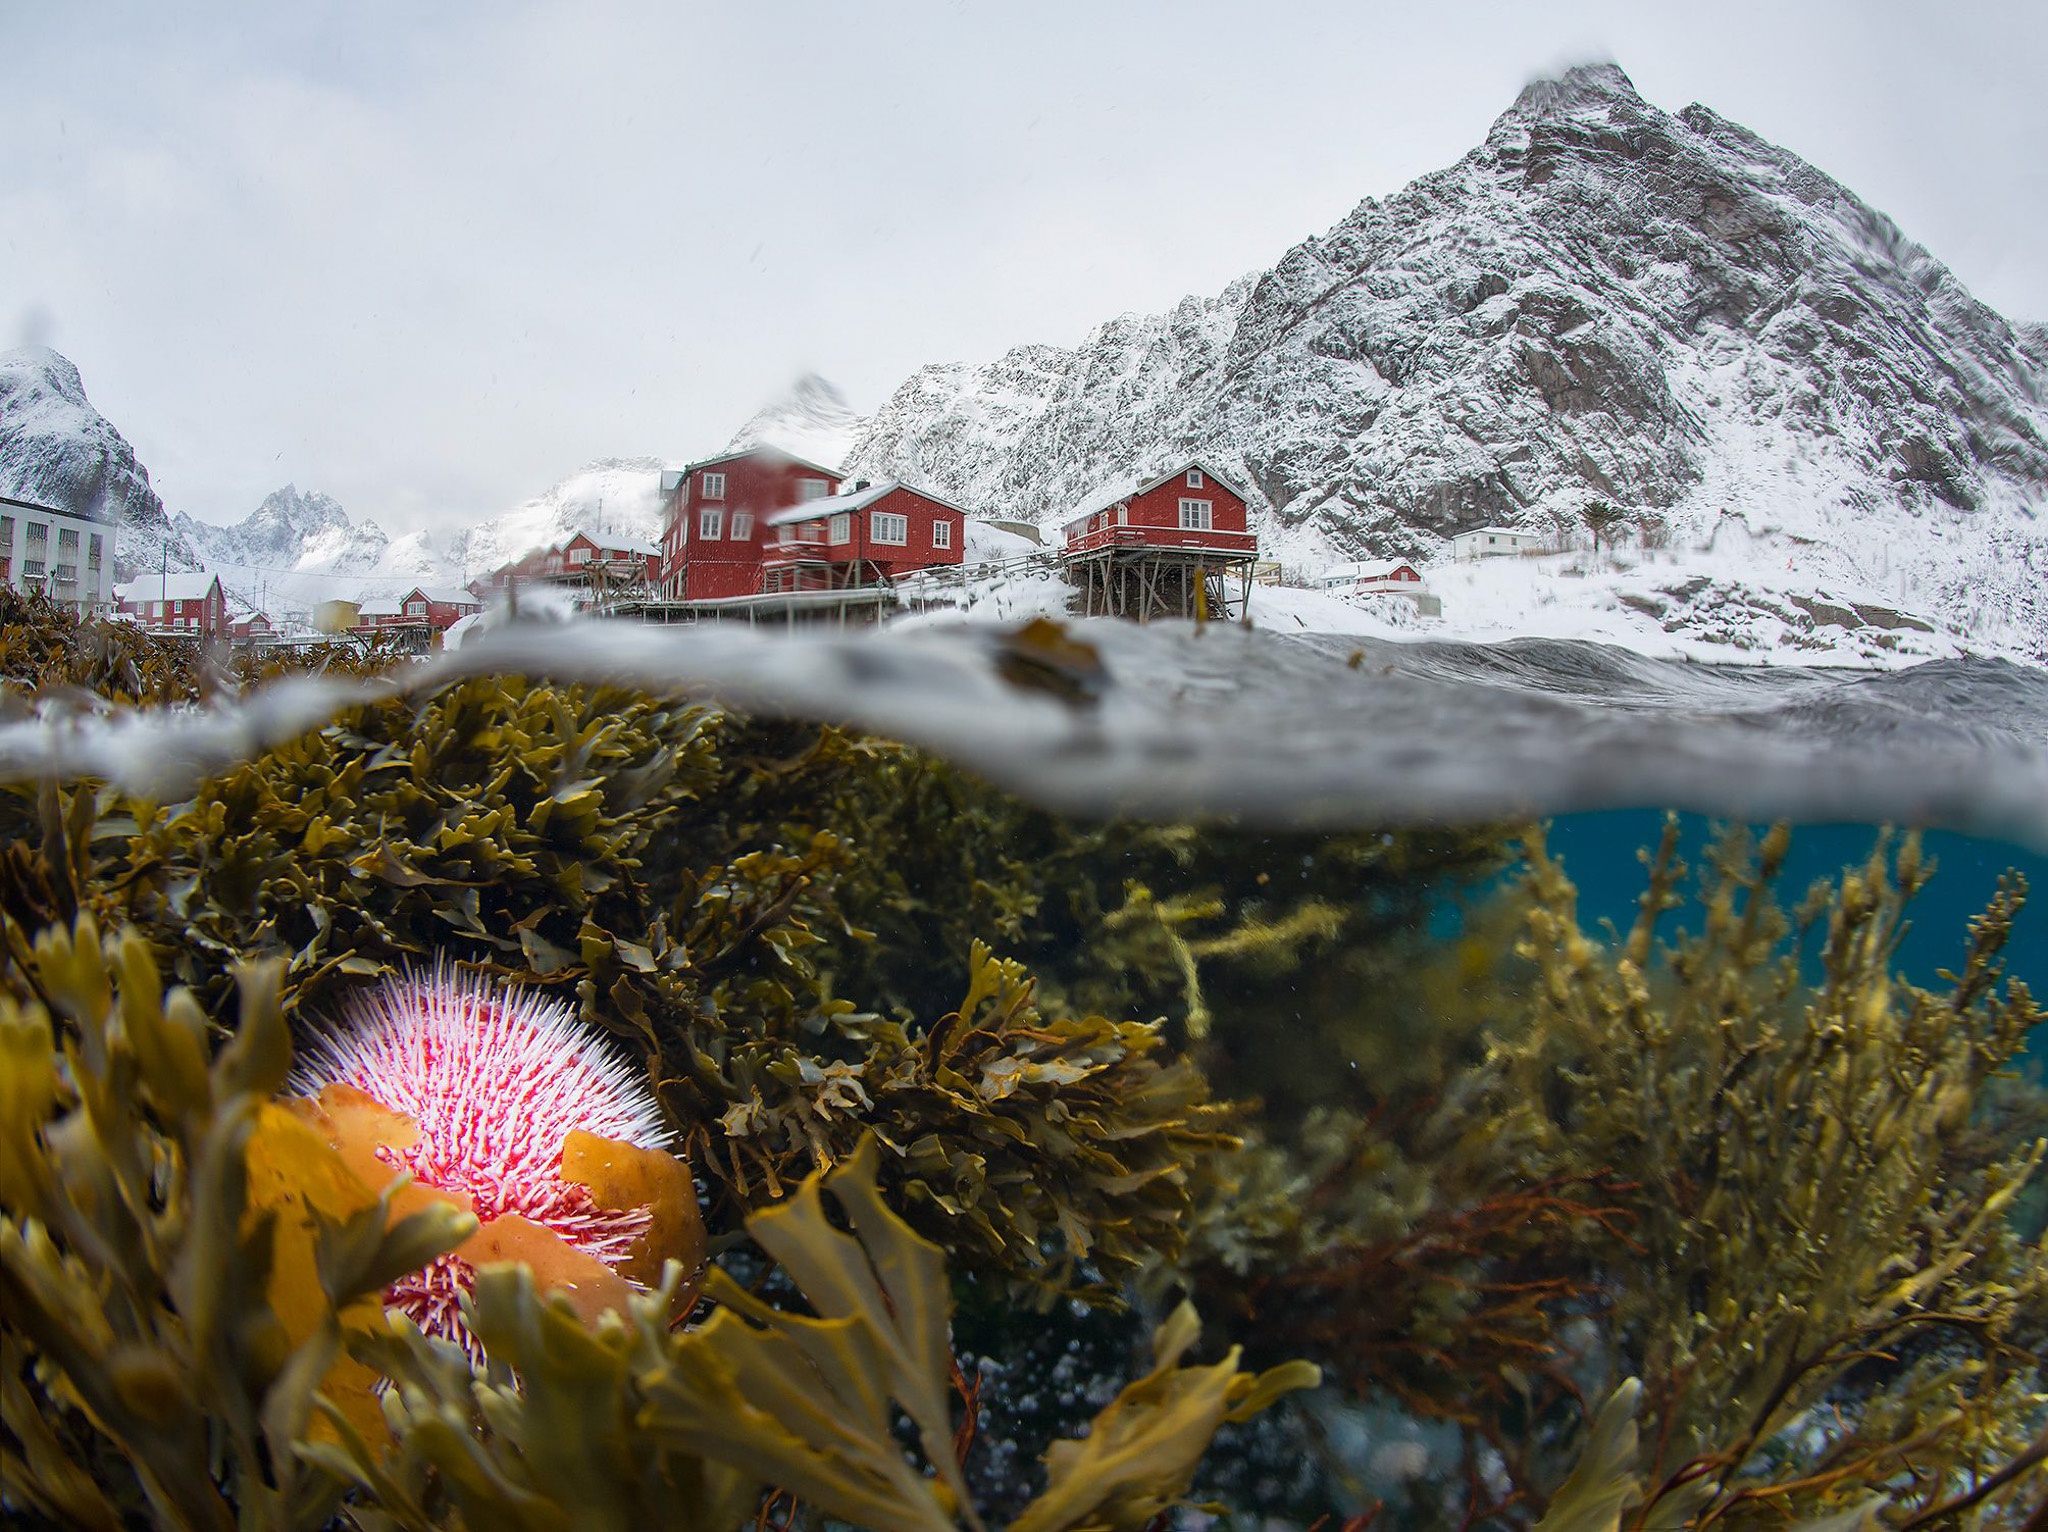 General 2048x1532 underwater nature mountains plants Norway